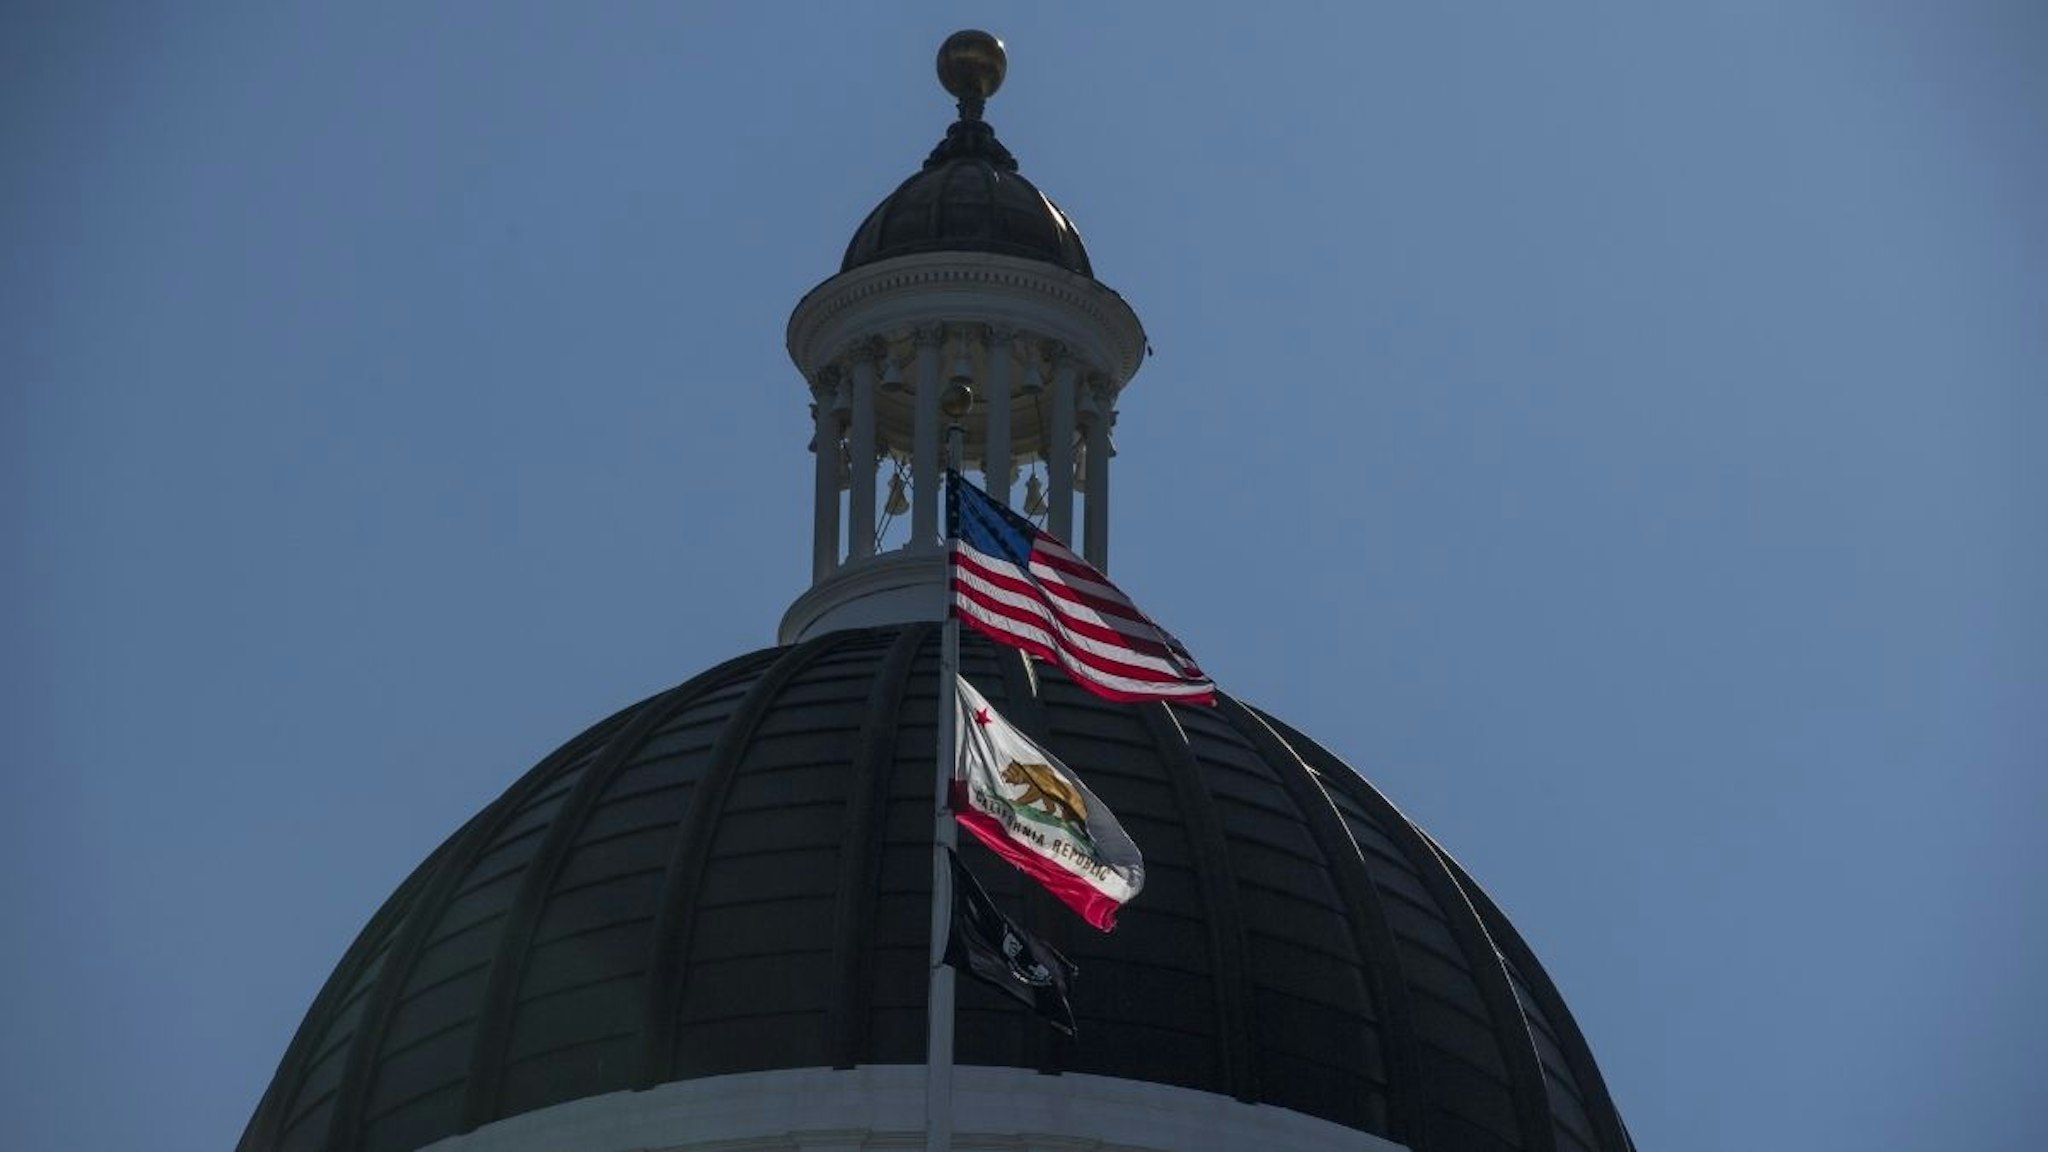 The American, California State, and POW/MIA flags fly in front of the California State Capitol building in Sacramento, California, U.S., on Thursday, March 30, 2017.